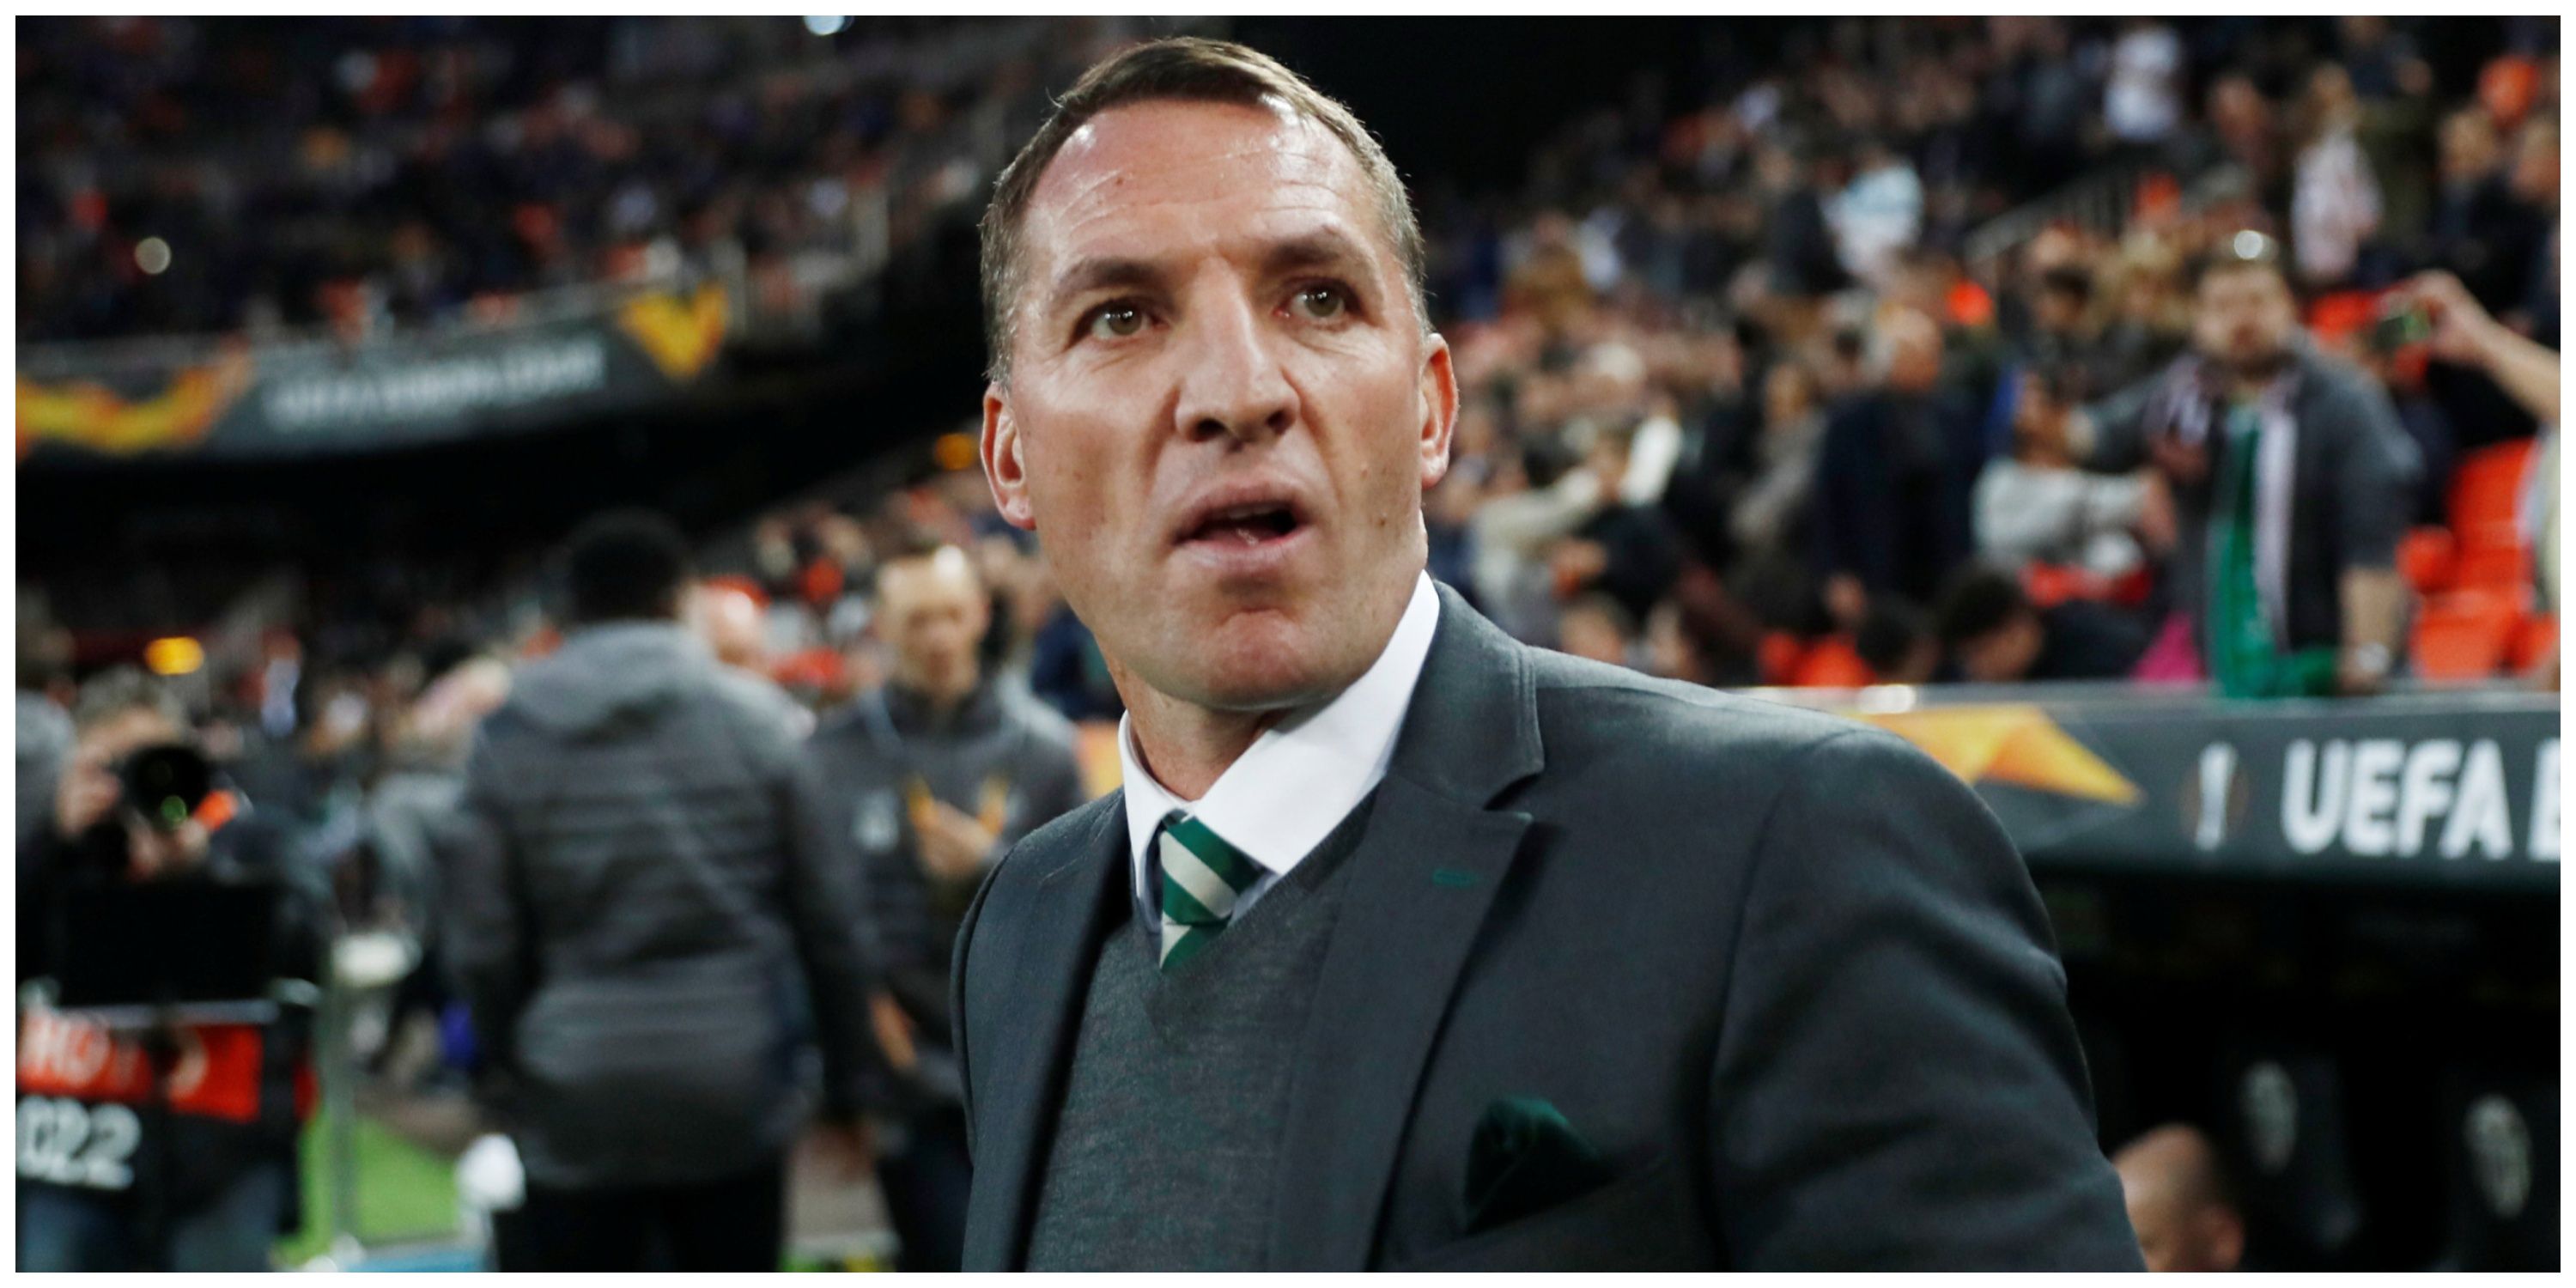 Celtic manager Brendan Rodgers looking surprised